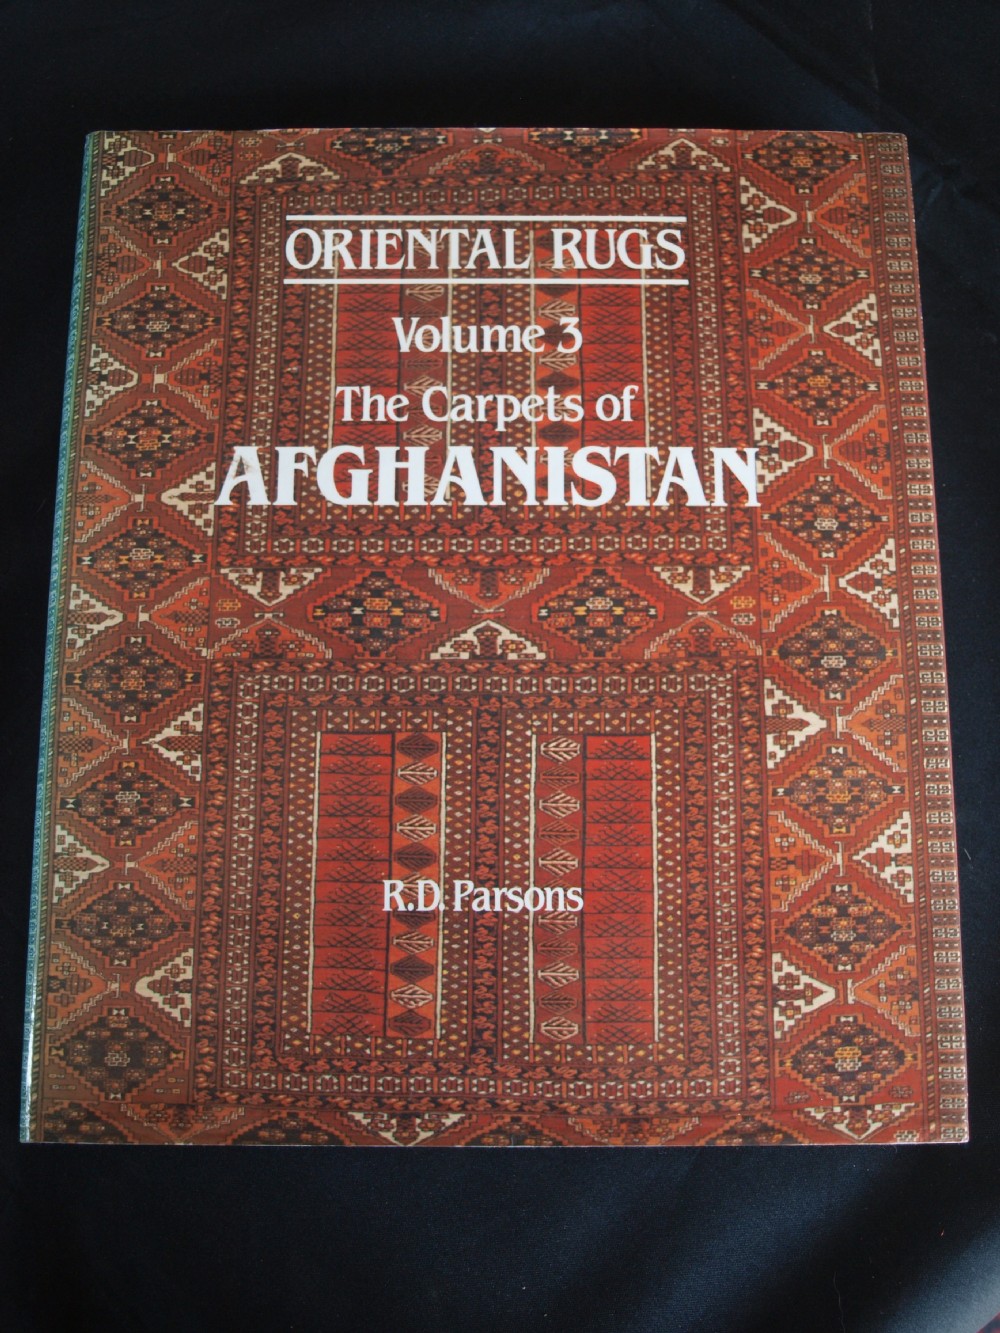 oriantal rugs volume 3 the carpets of afghanistan